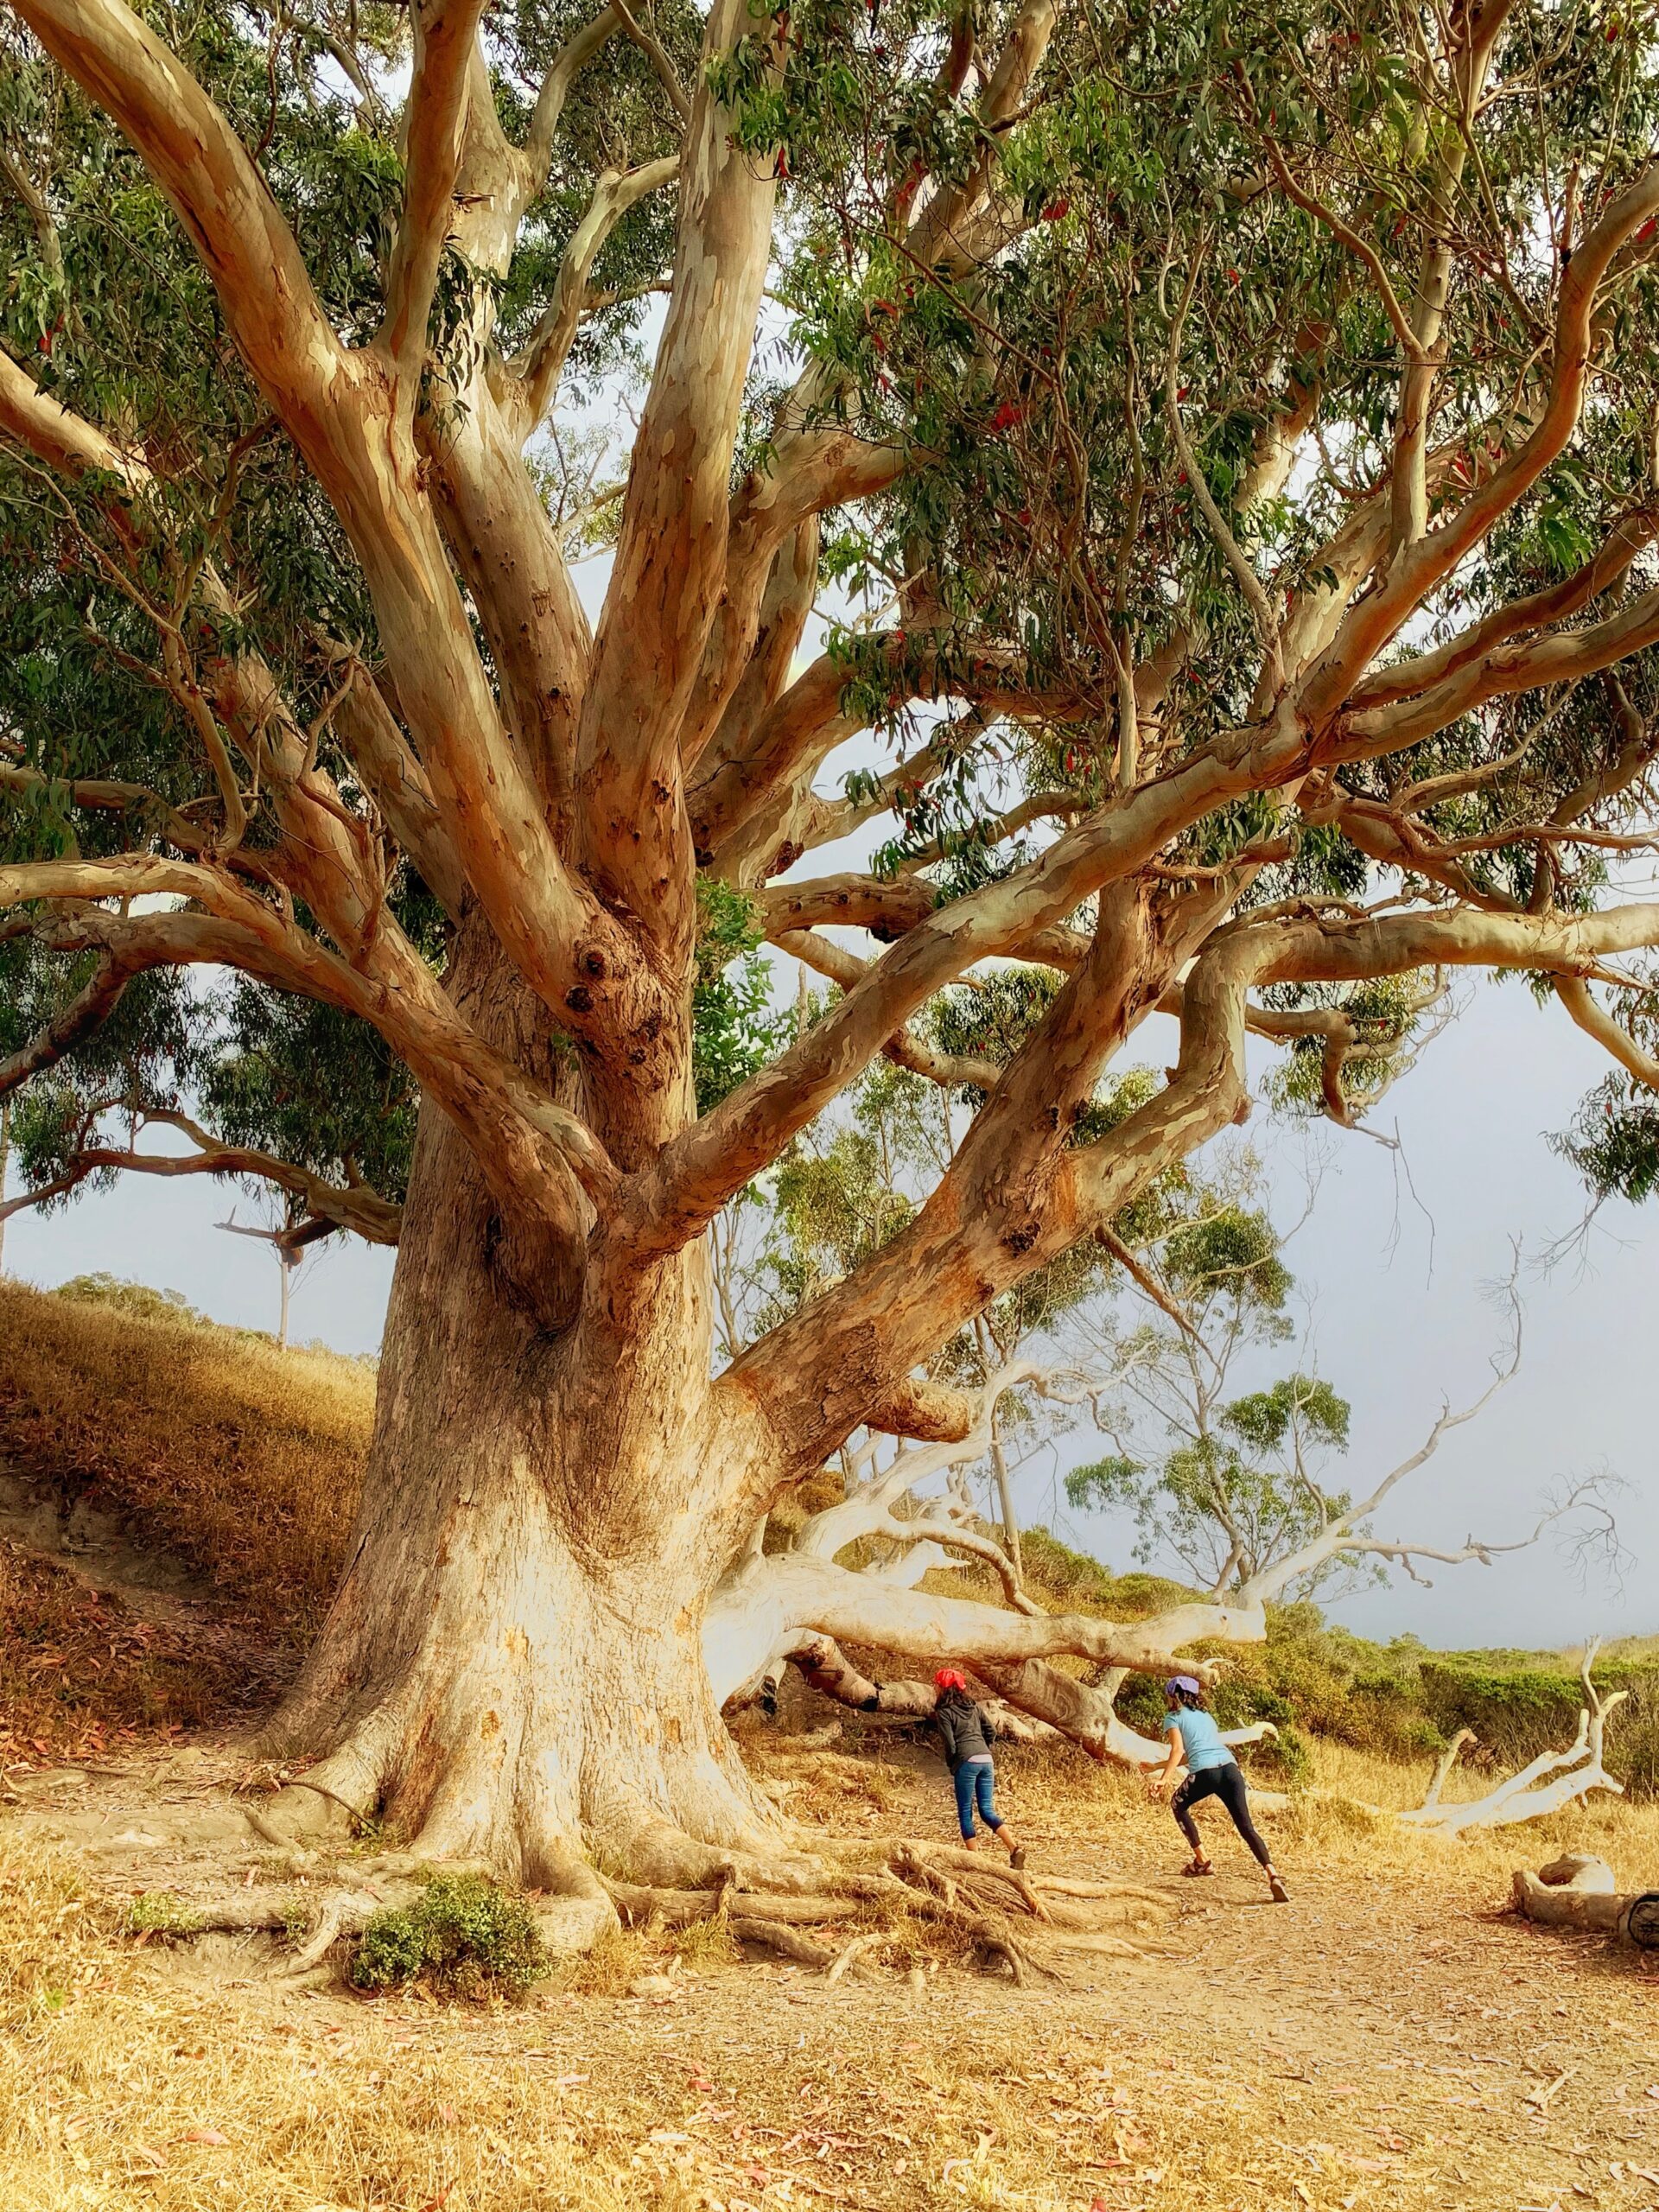 Two children playing near a large eucalyptus tree.